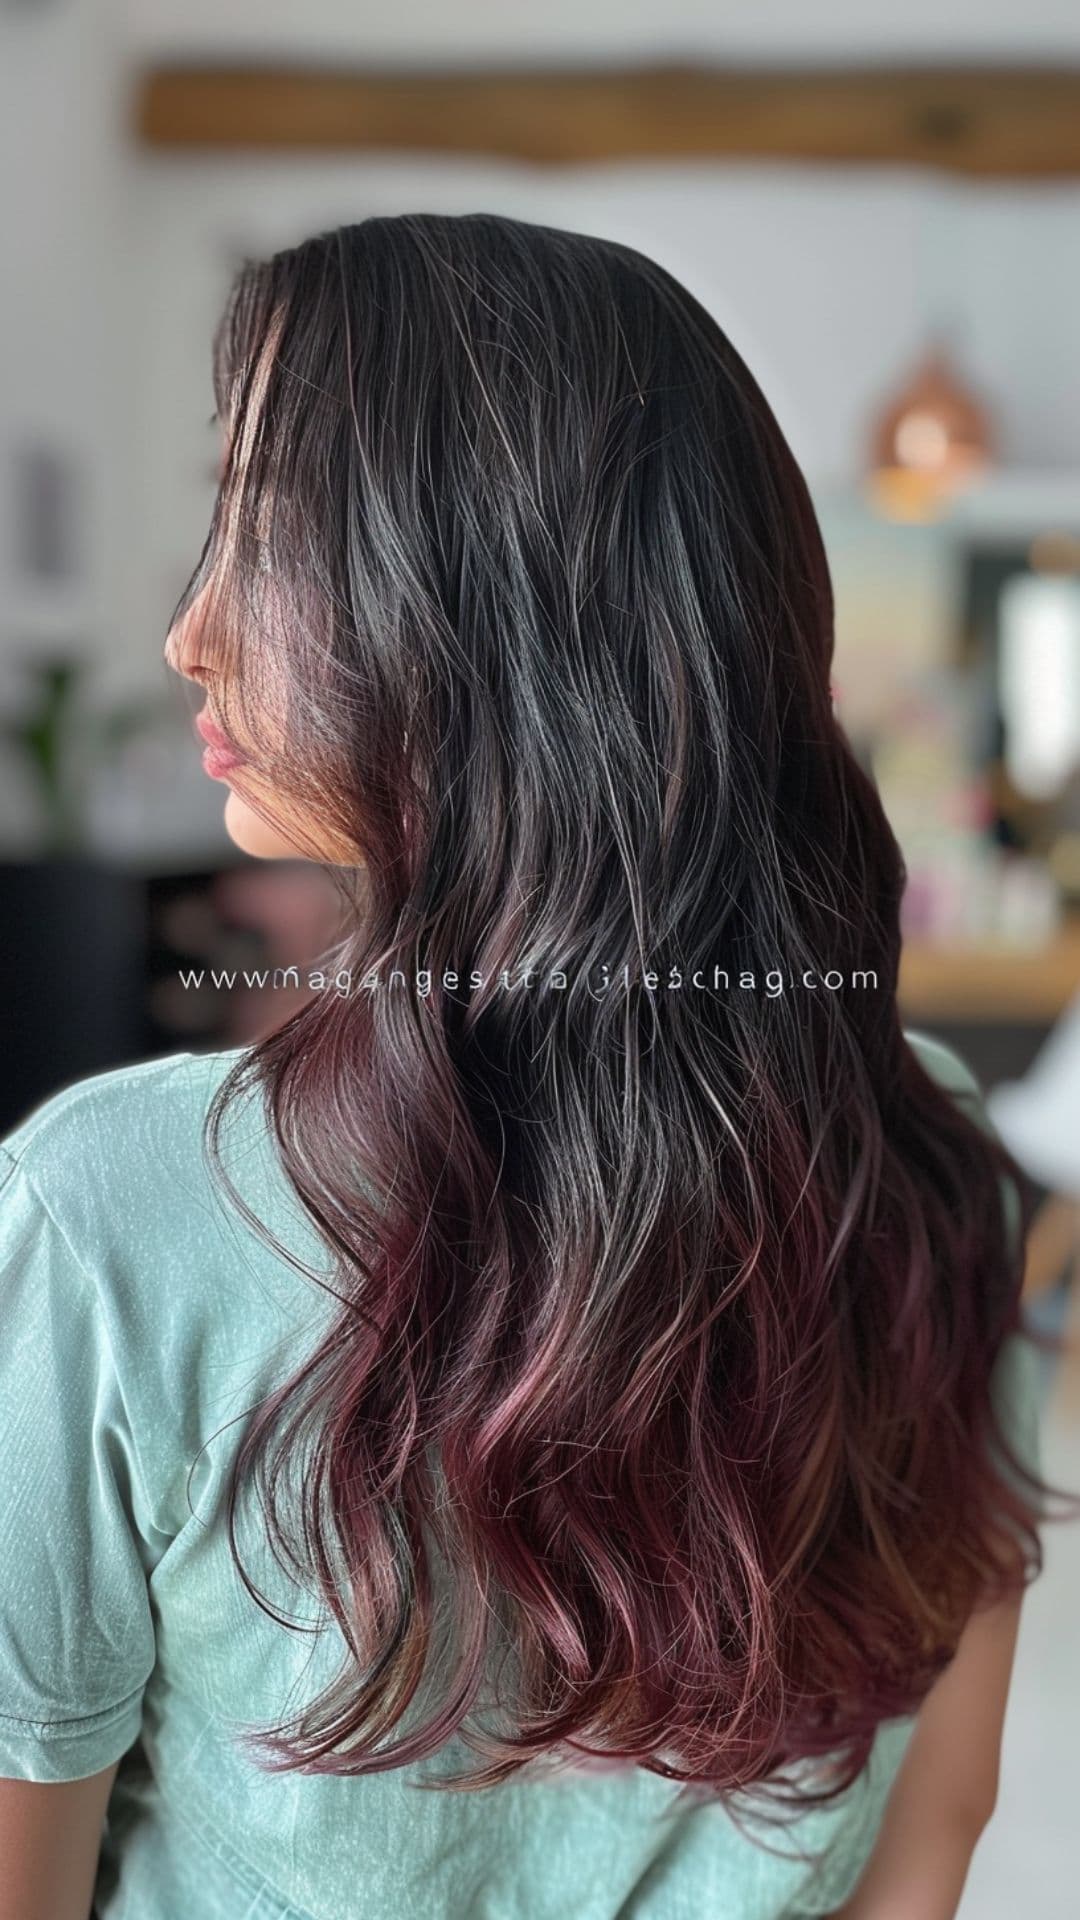 A woman modelling a long, layered cut with deep natural root and soft burgundy tips.